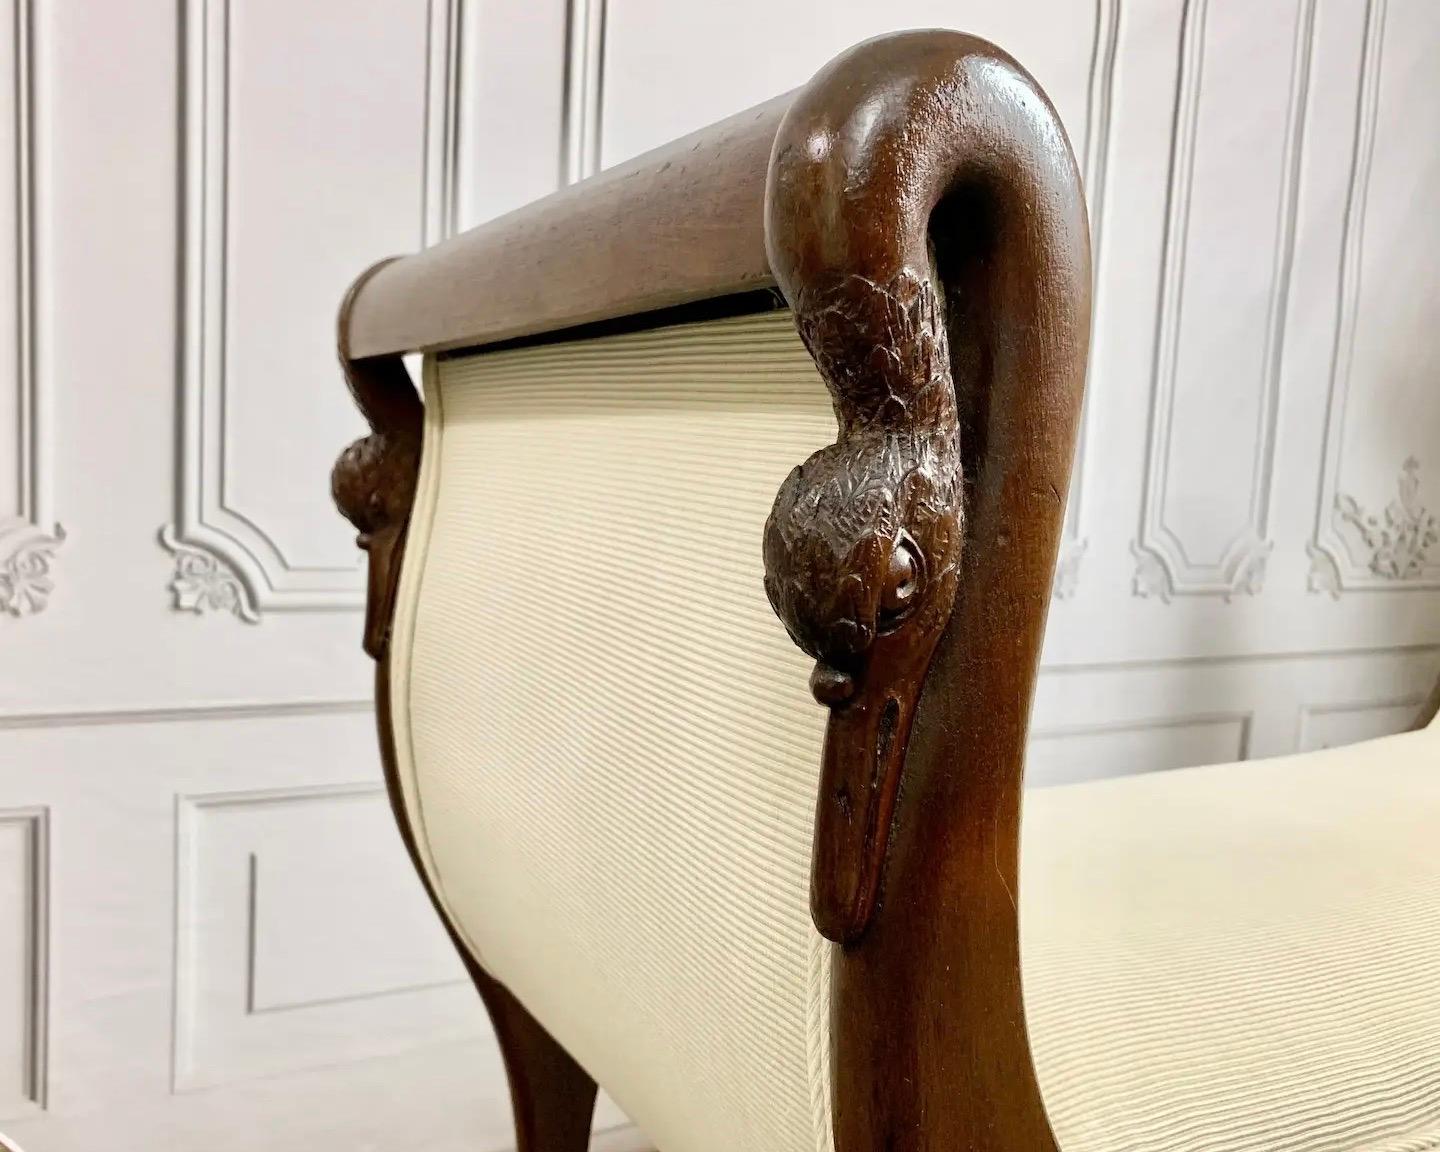 Freshly reupholstered late 19th century Empire style bench in a neutral cream-colored fabric. Artisan crafted in solid, rich walnut with elegant scrolled arms featuring hand-carved swan figureheads, supported on sleek cabriole legs finished with